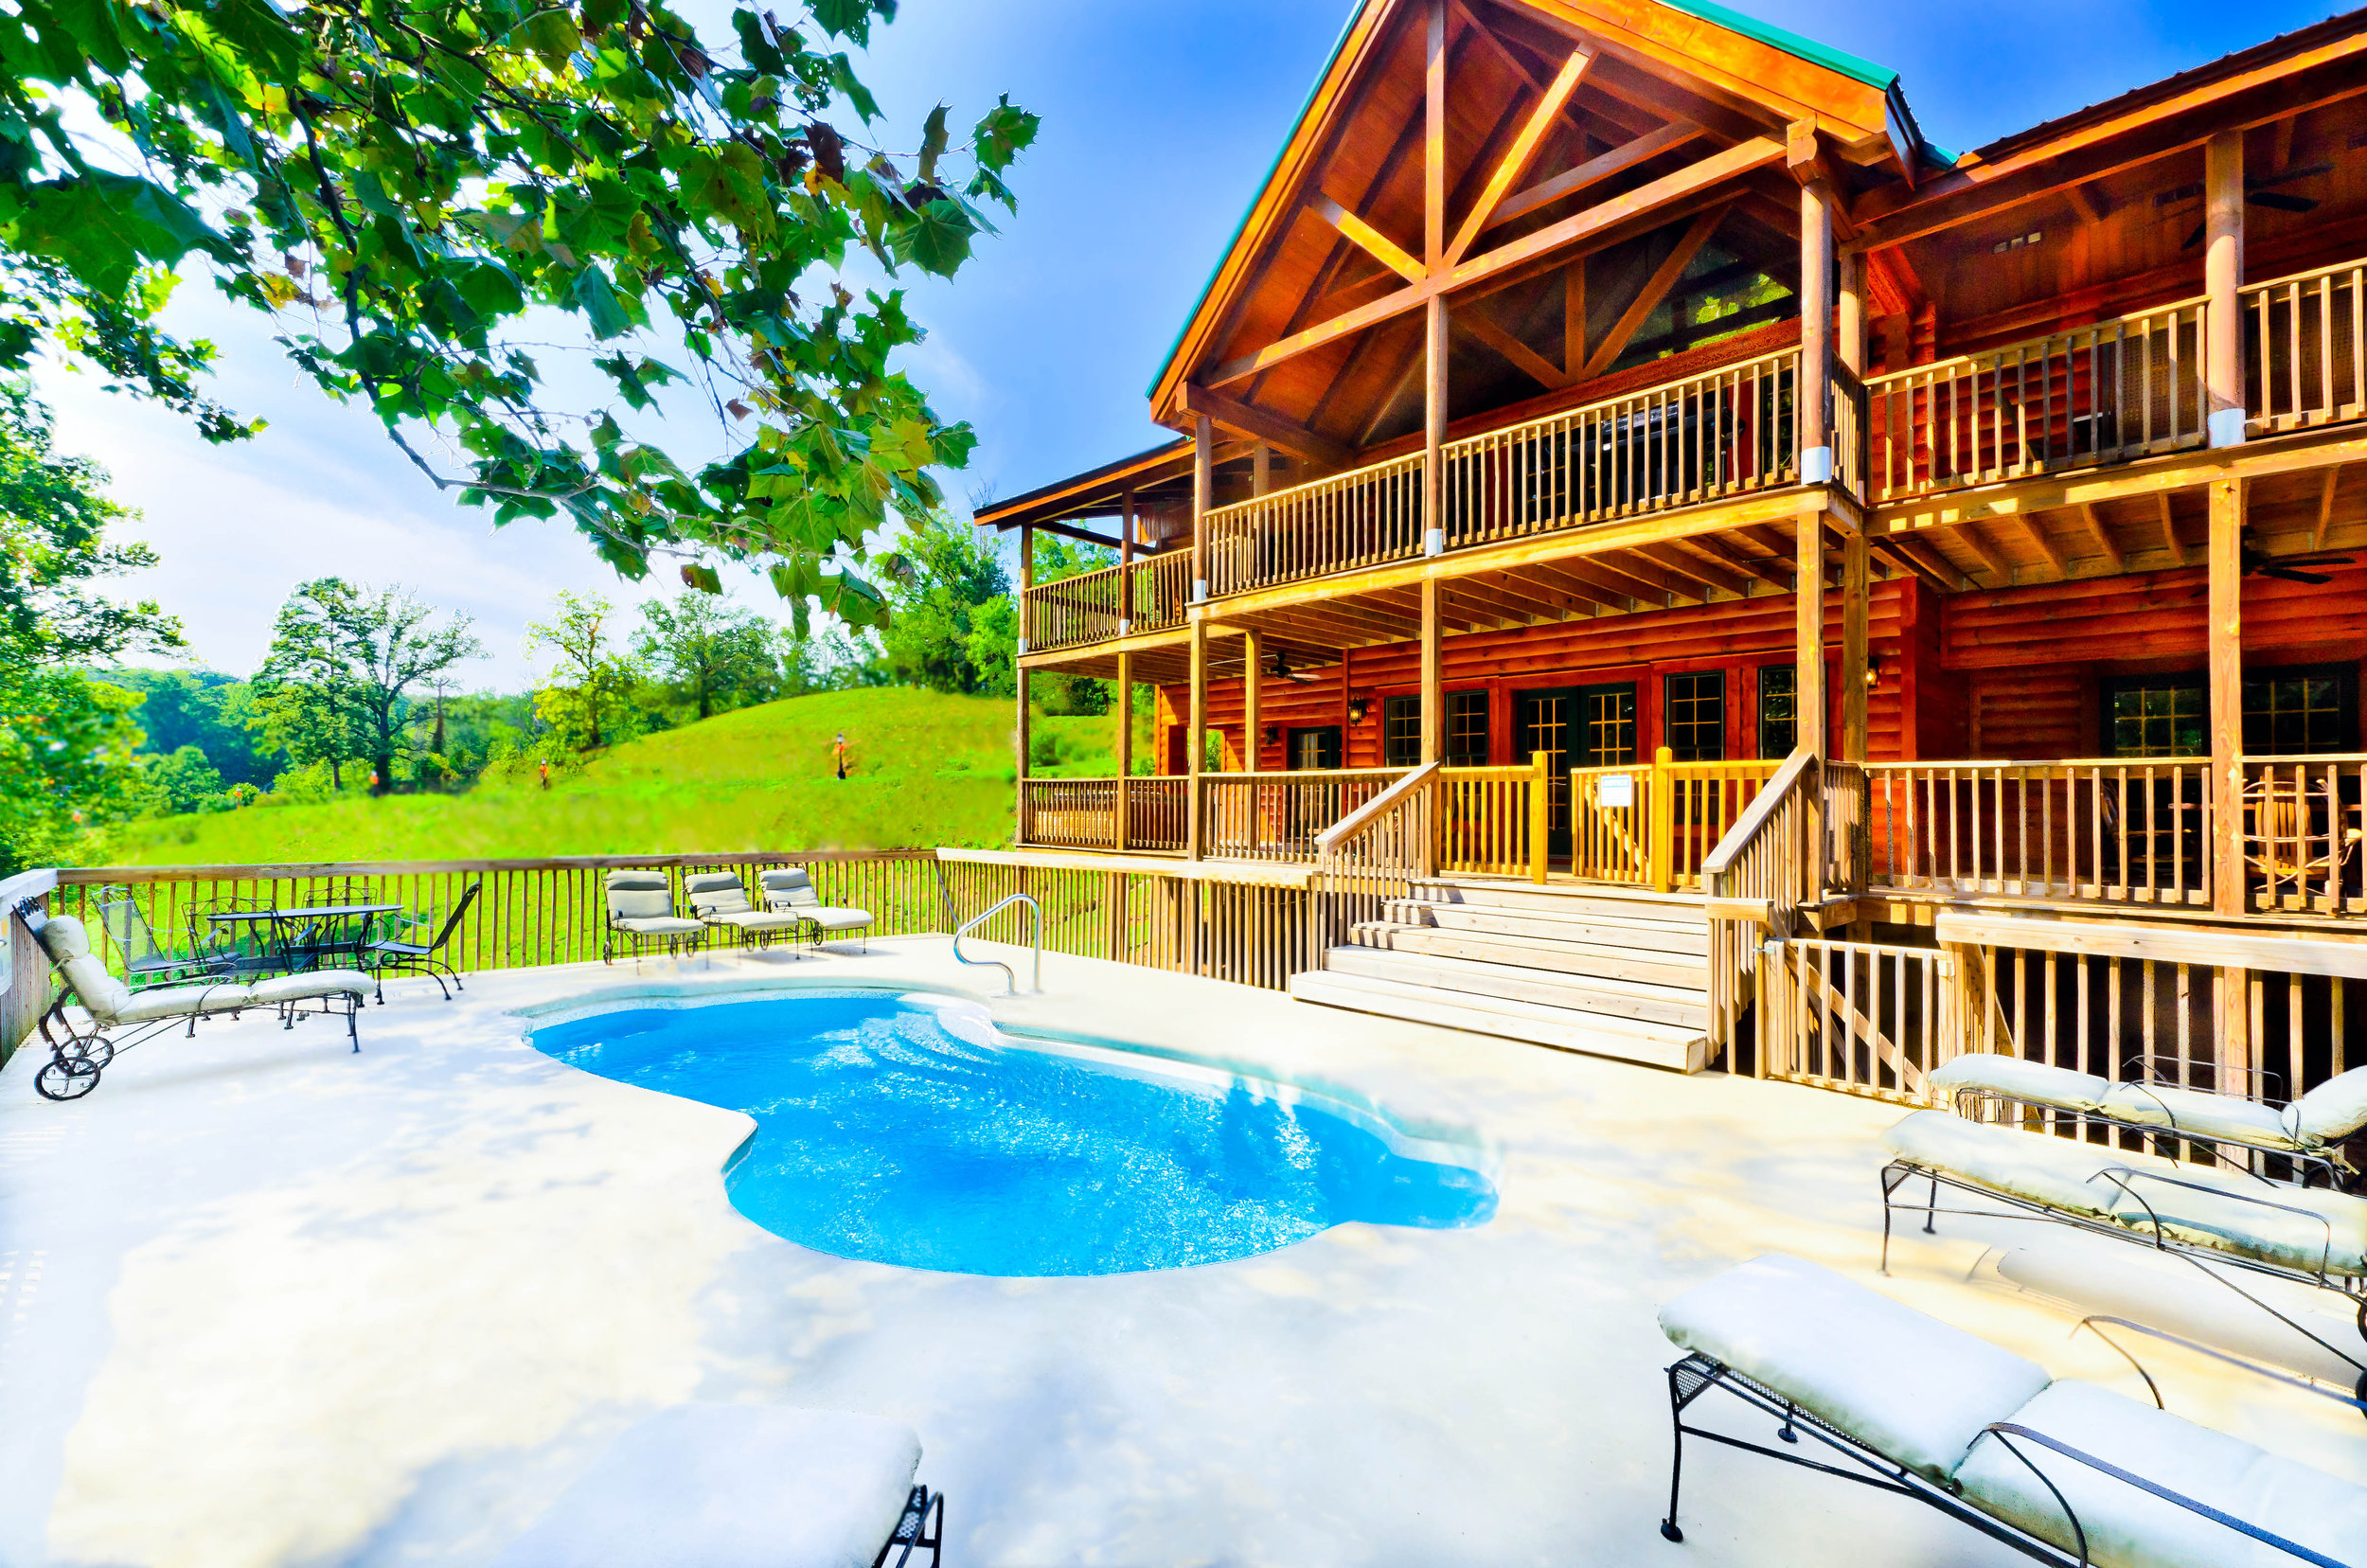 Cabin with pool.jpg